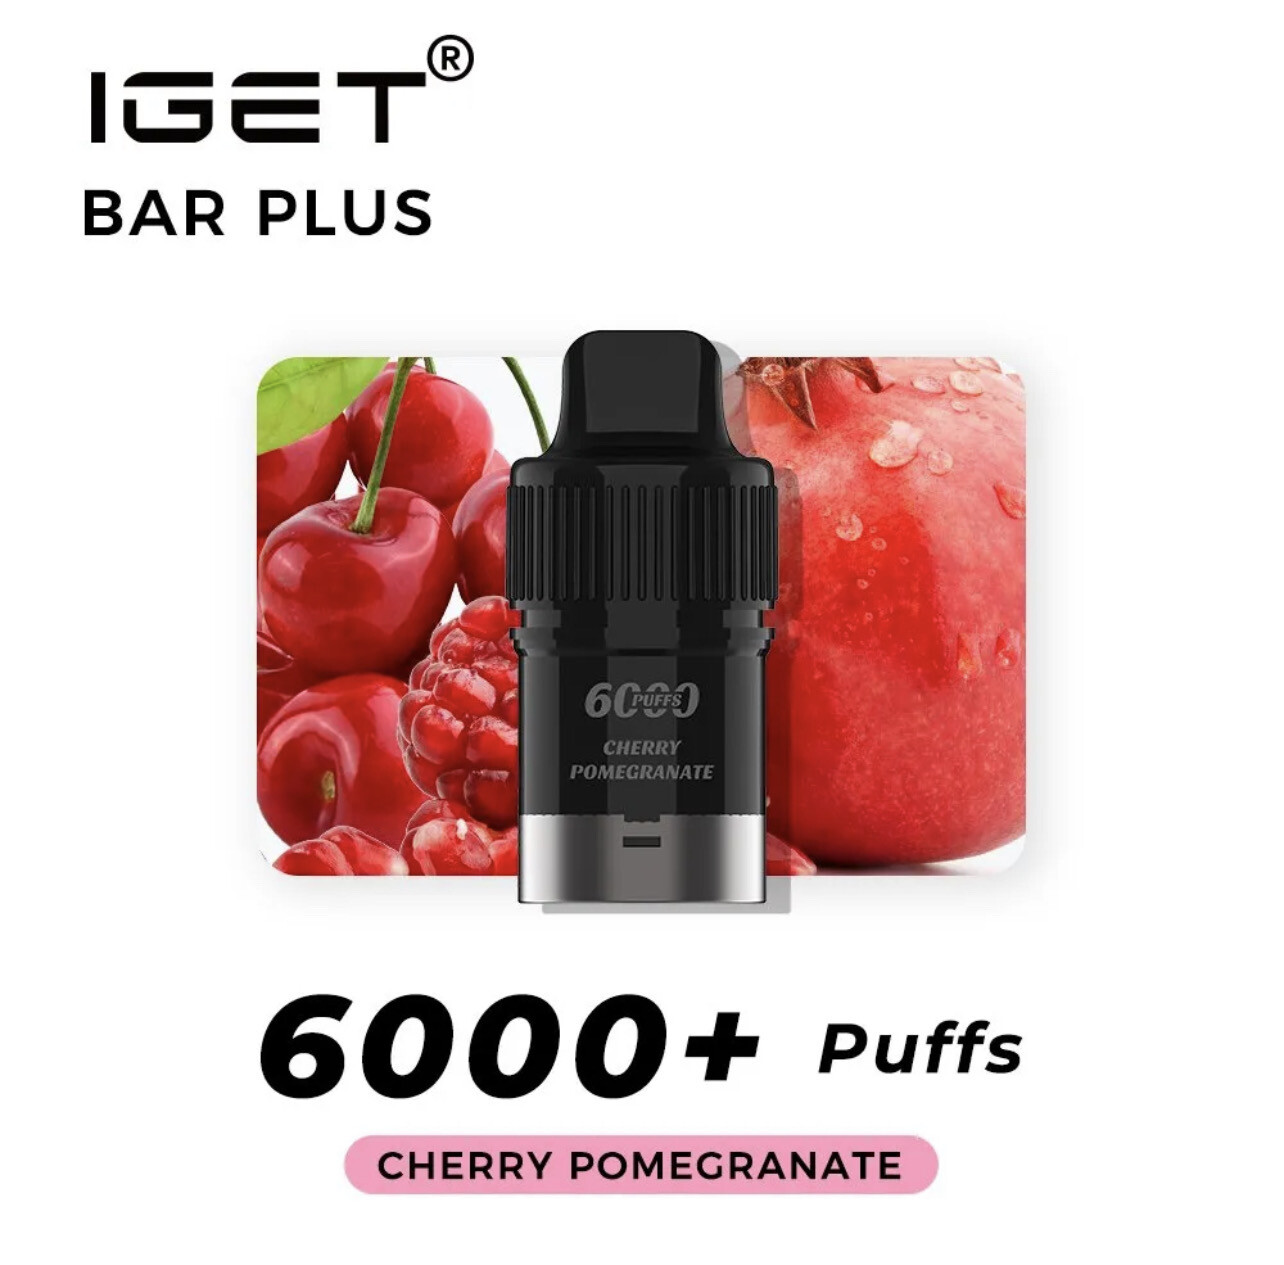 CHERRY POMEGRANATE PODS ONLY 6000 PUFFS